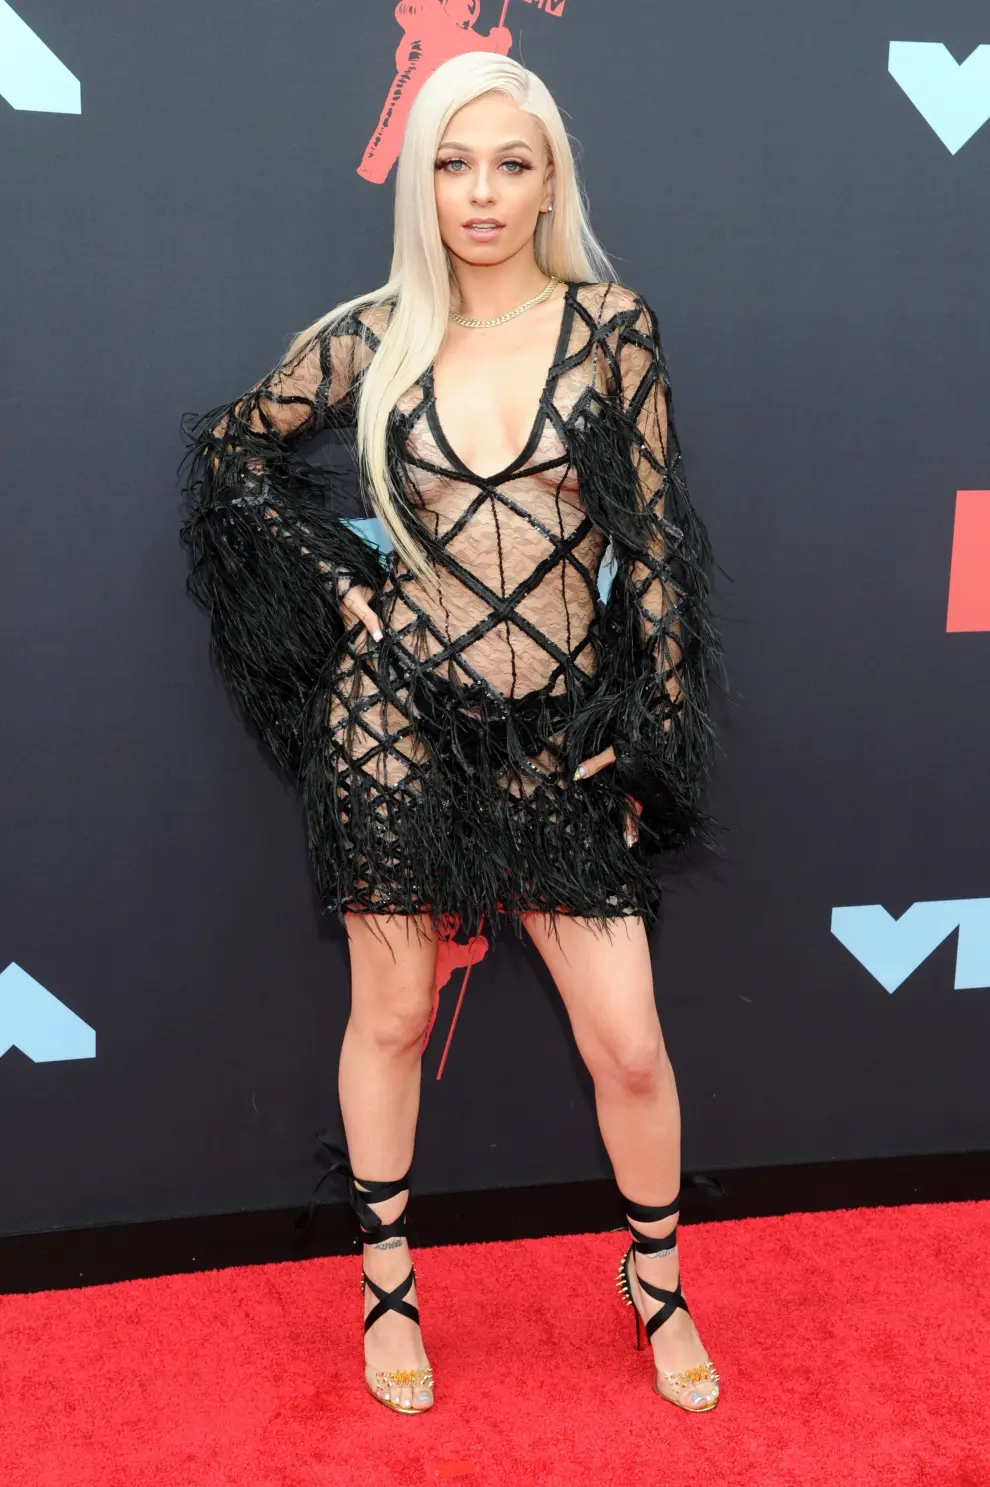 New York (United States), 26/08/2019.- US singer Kiana Lede arrives on the red carpet for the 2019 MTV Video Music Awards at Radio City Music Hall in New York, New York, USA, 26 August 2019. (Estados Unidos, Nueva York) EFE/EPA/DJ JOHNSON 2019 MTV Video Music Awards in New York